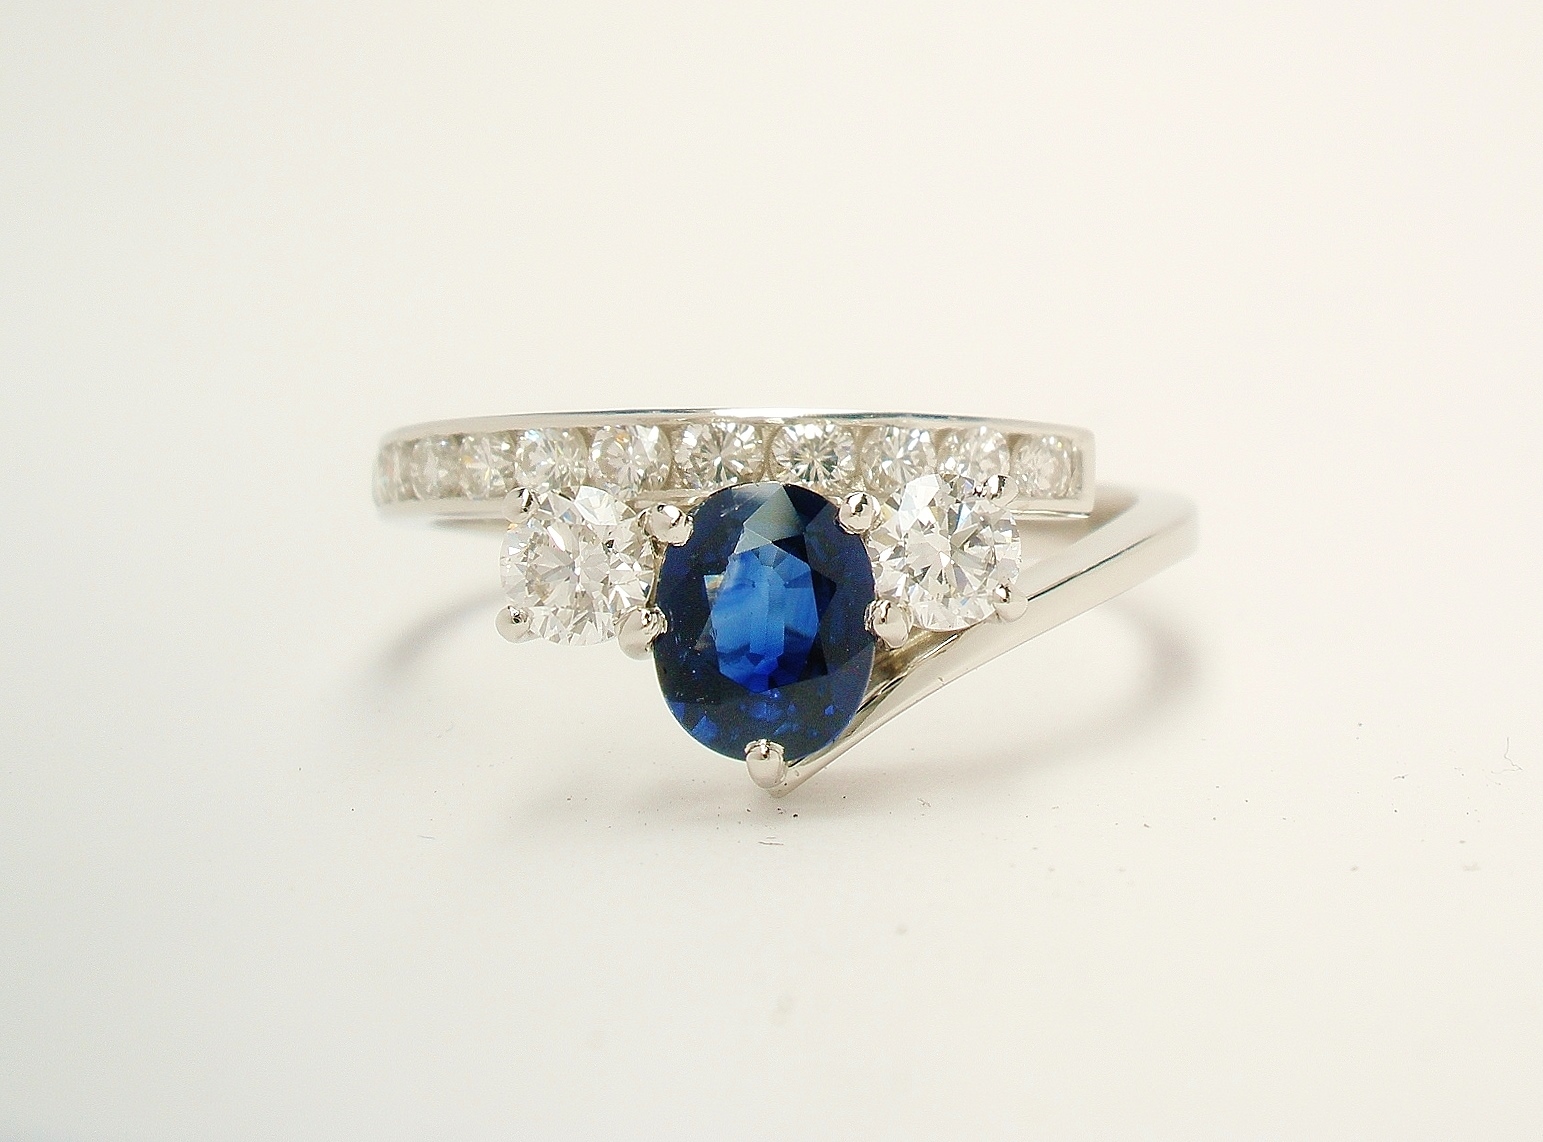 A 3 stone oval sapphire and round brilliant cut diamond straight wishbone cross-over ring with 12 round brilliant cut diamonds channel set in the straight shoulder. This remodelled in platinum from a sapphire and diamond cluster ring and a 2 stone diamond ring.